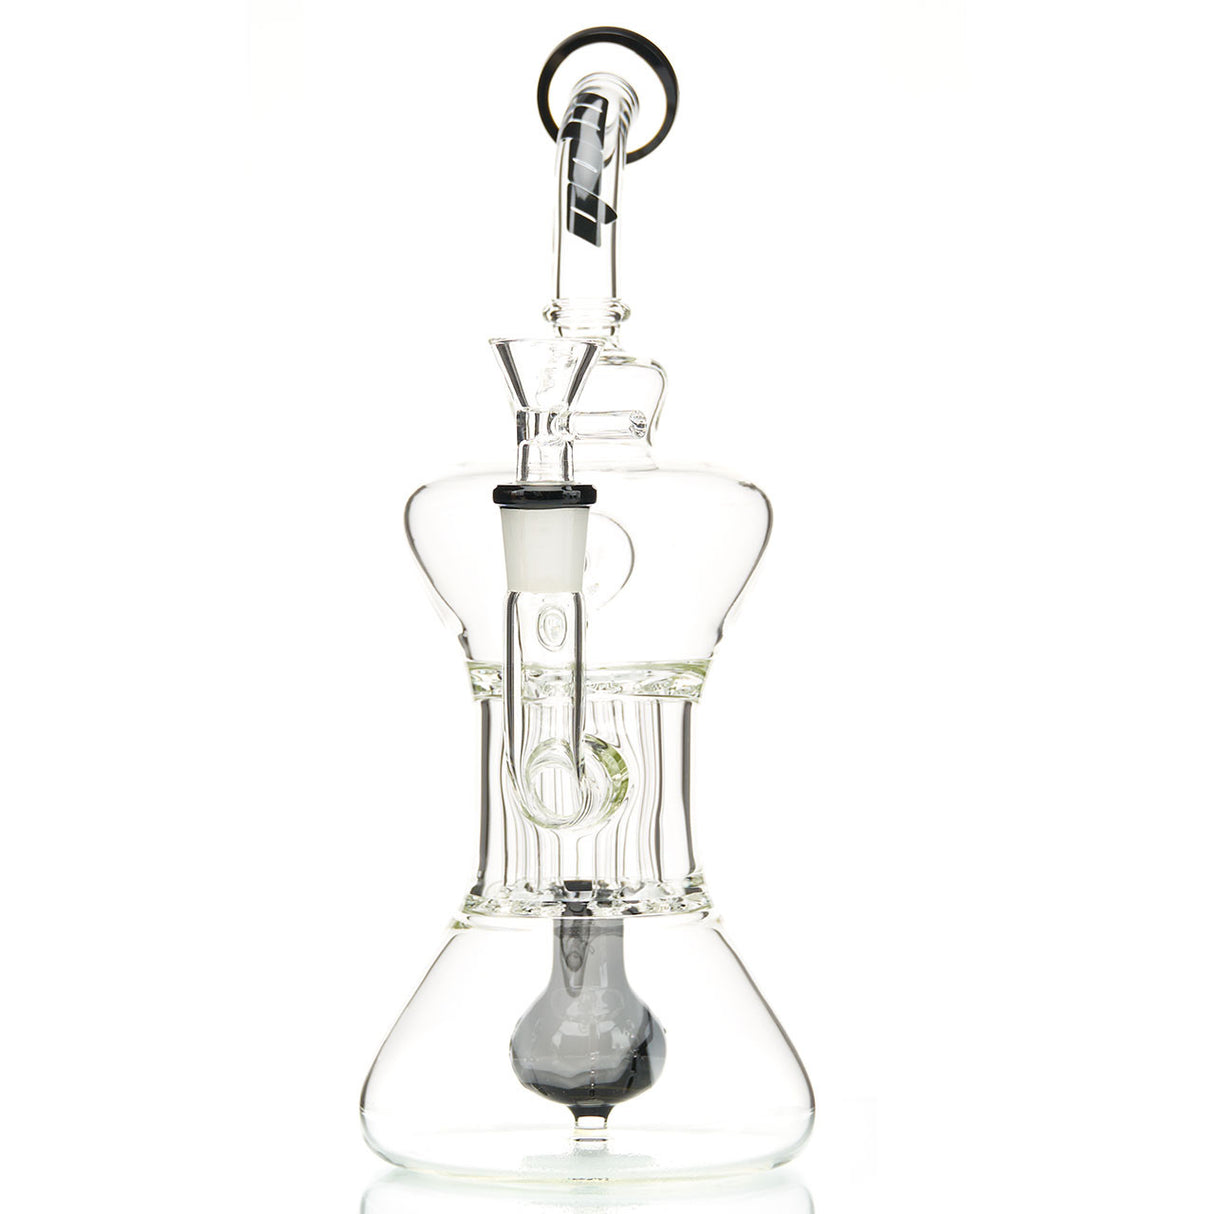 MOB Glass Optimist Medium Size Water Pipe for Flower or Concentrates Hour-Glass Shaped with Orb Diffuser